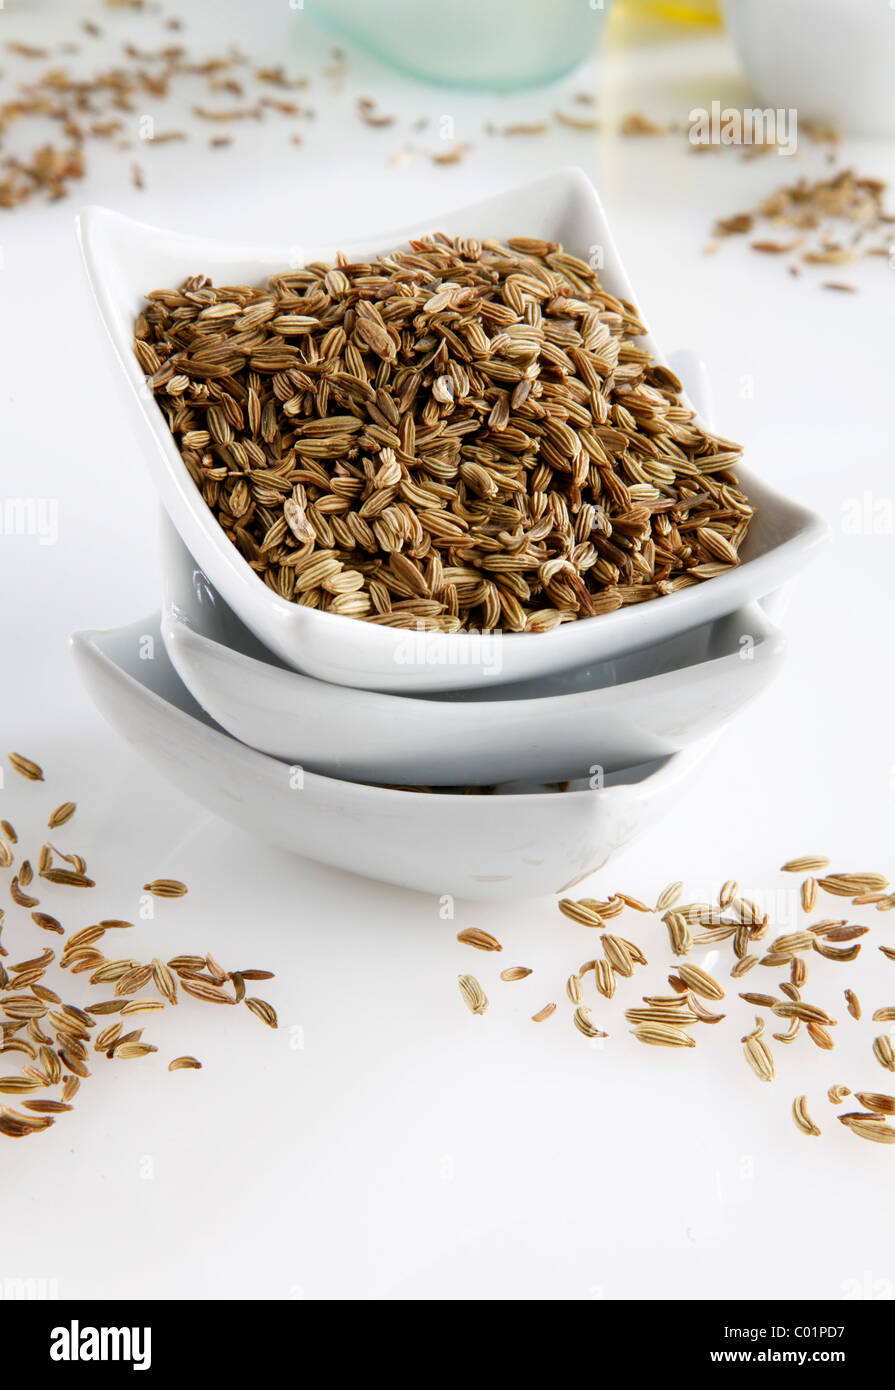 FENNEL SEEDS Stock Photo